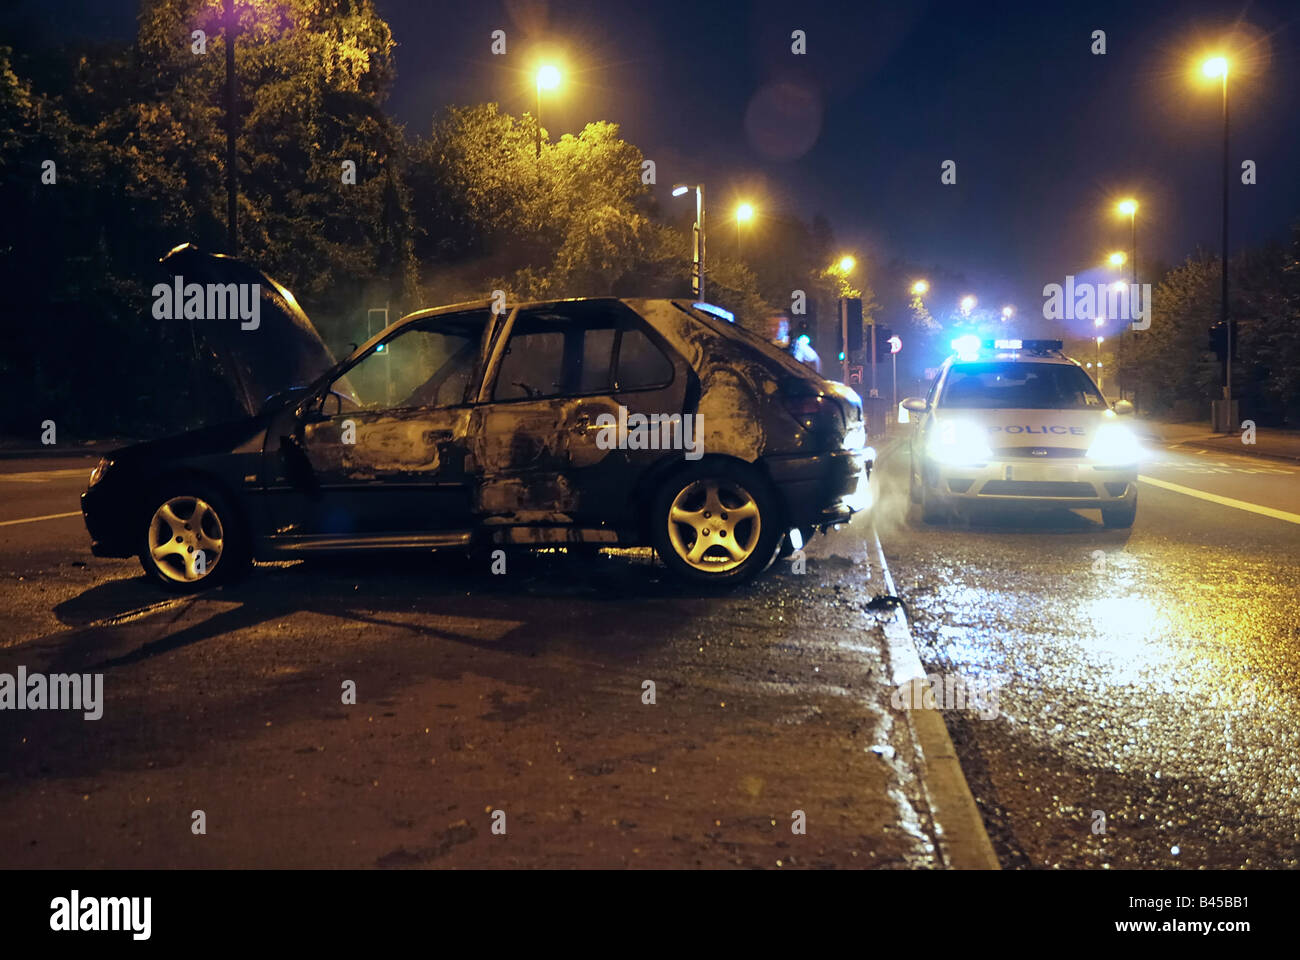 Burned out  car attended to by the police in the early hours of the morning Stock Photo